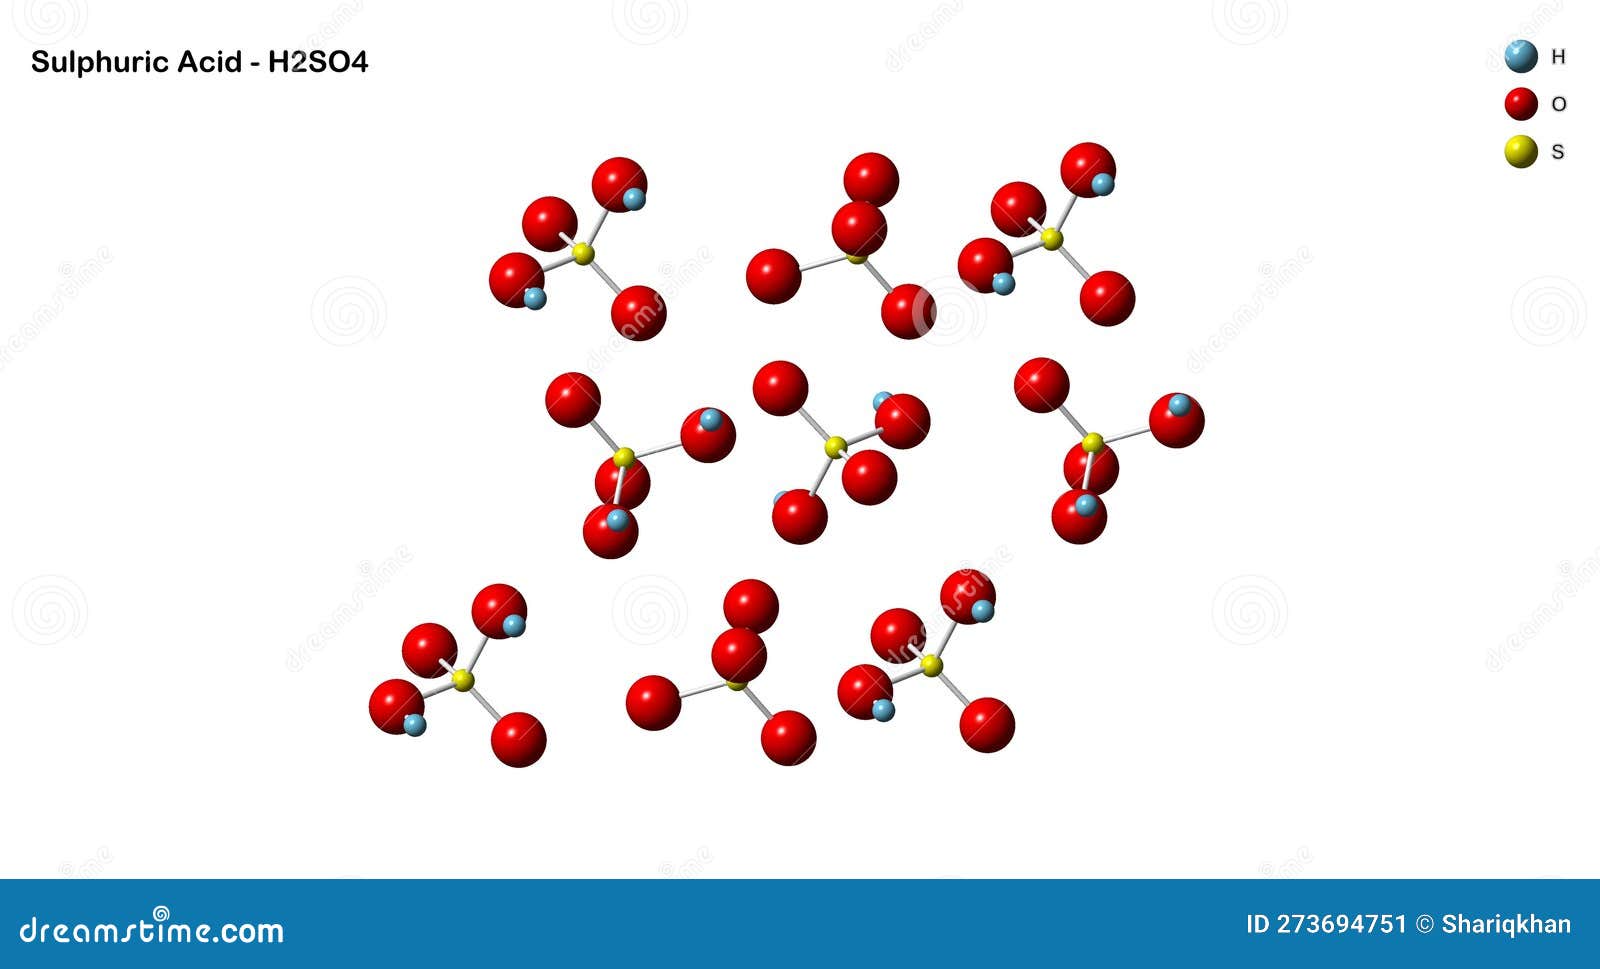 molecular or chemical structure of sulfuric acid or atomic arrangement of hydrogen, oxygen and sulphur in h2so4